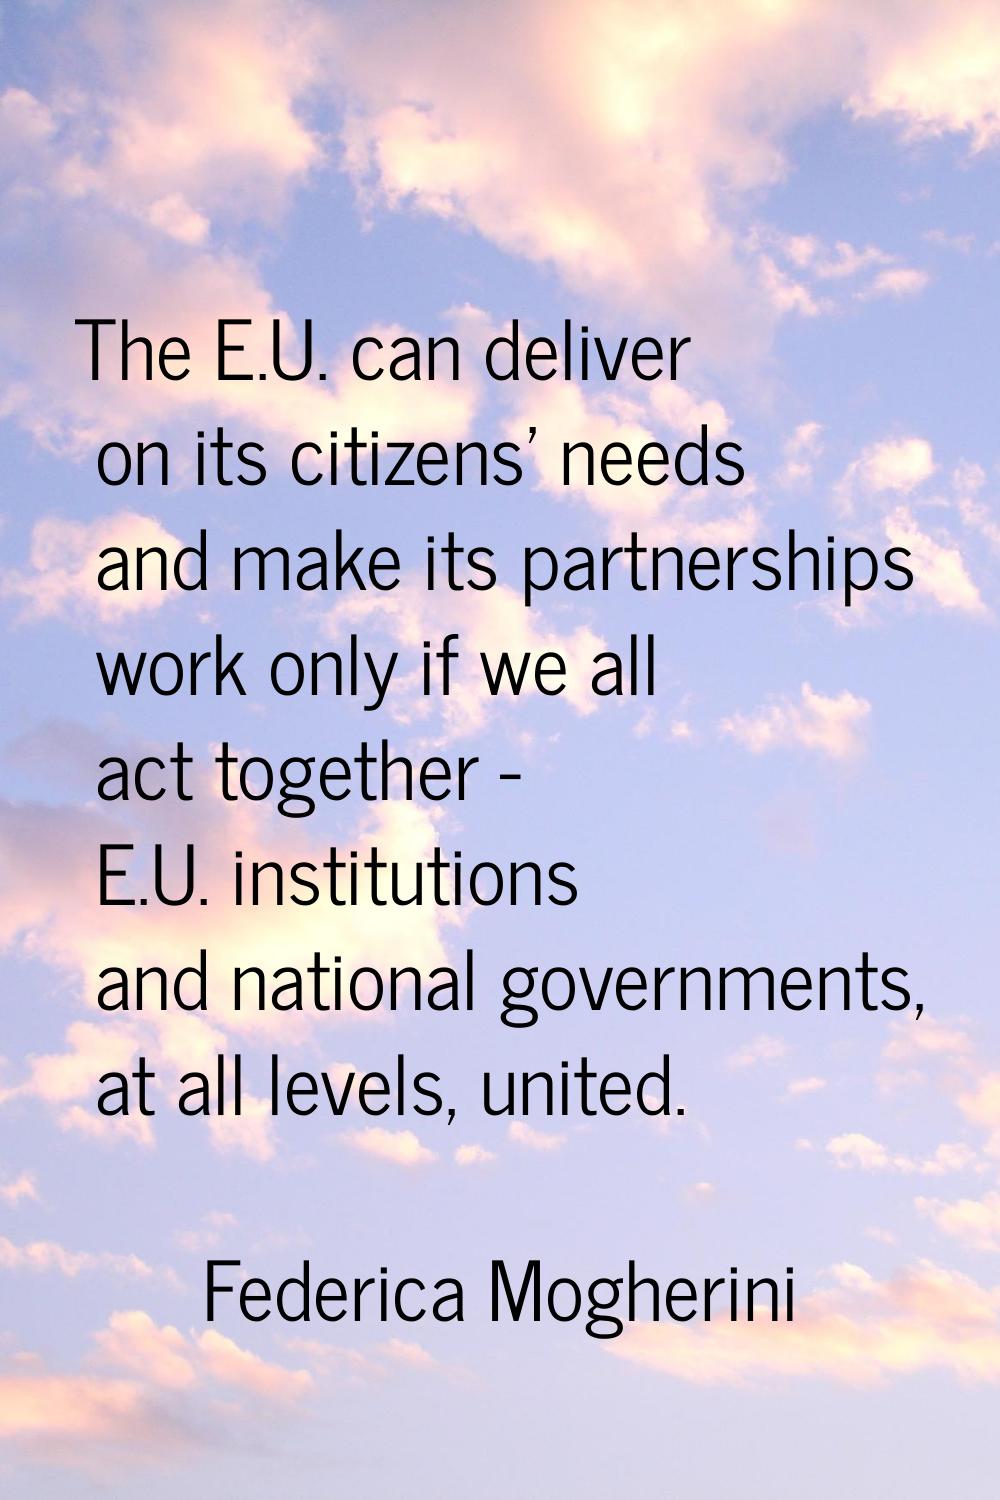 The E.U. can deliver on its citizens' needs and make its partnerships work only if we all act toget